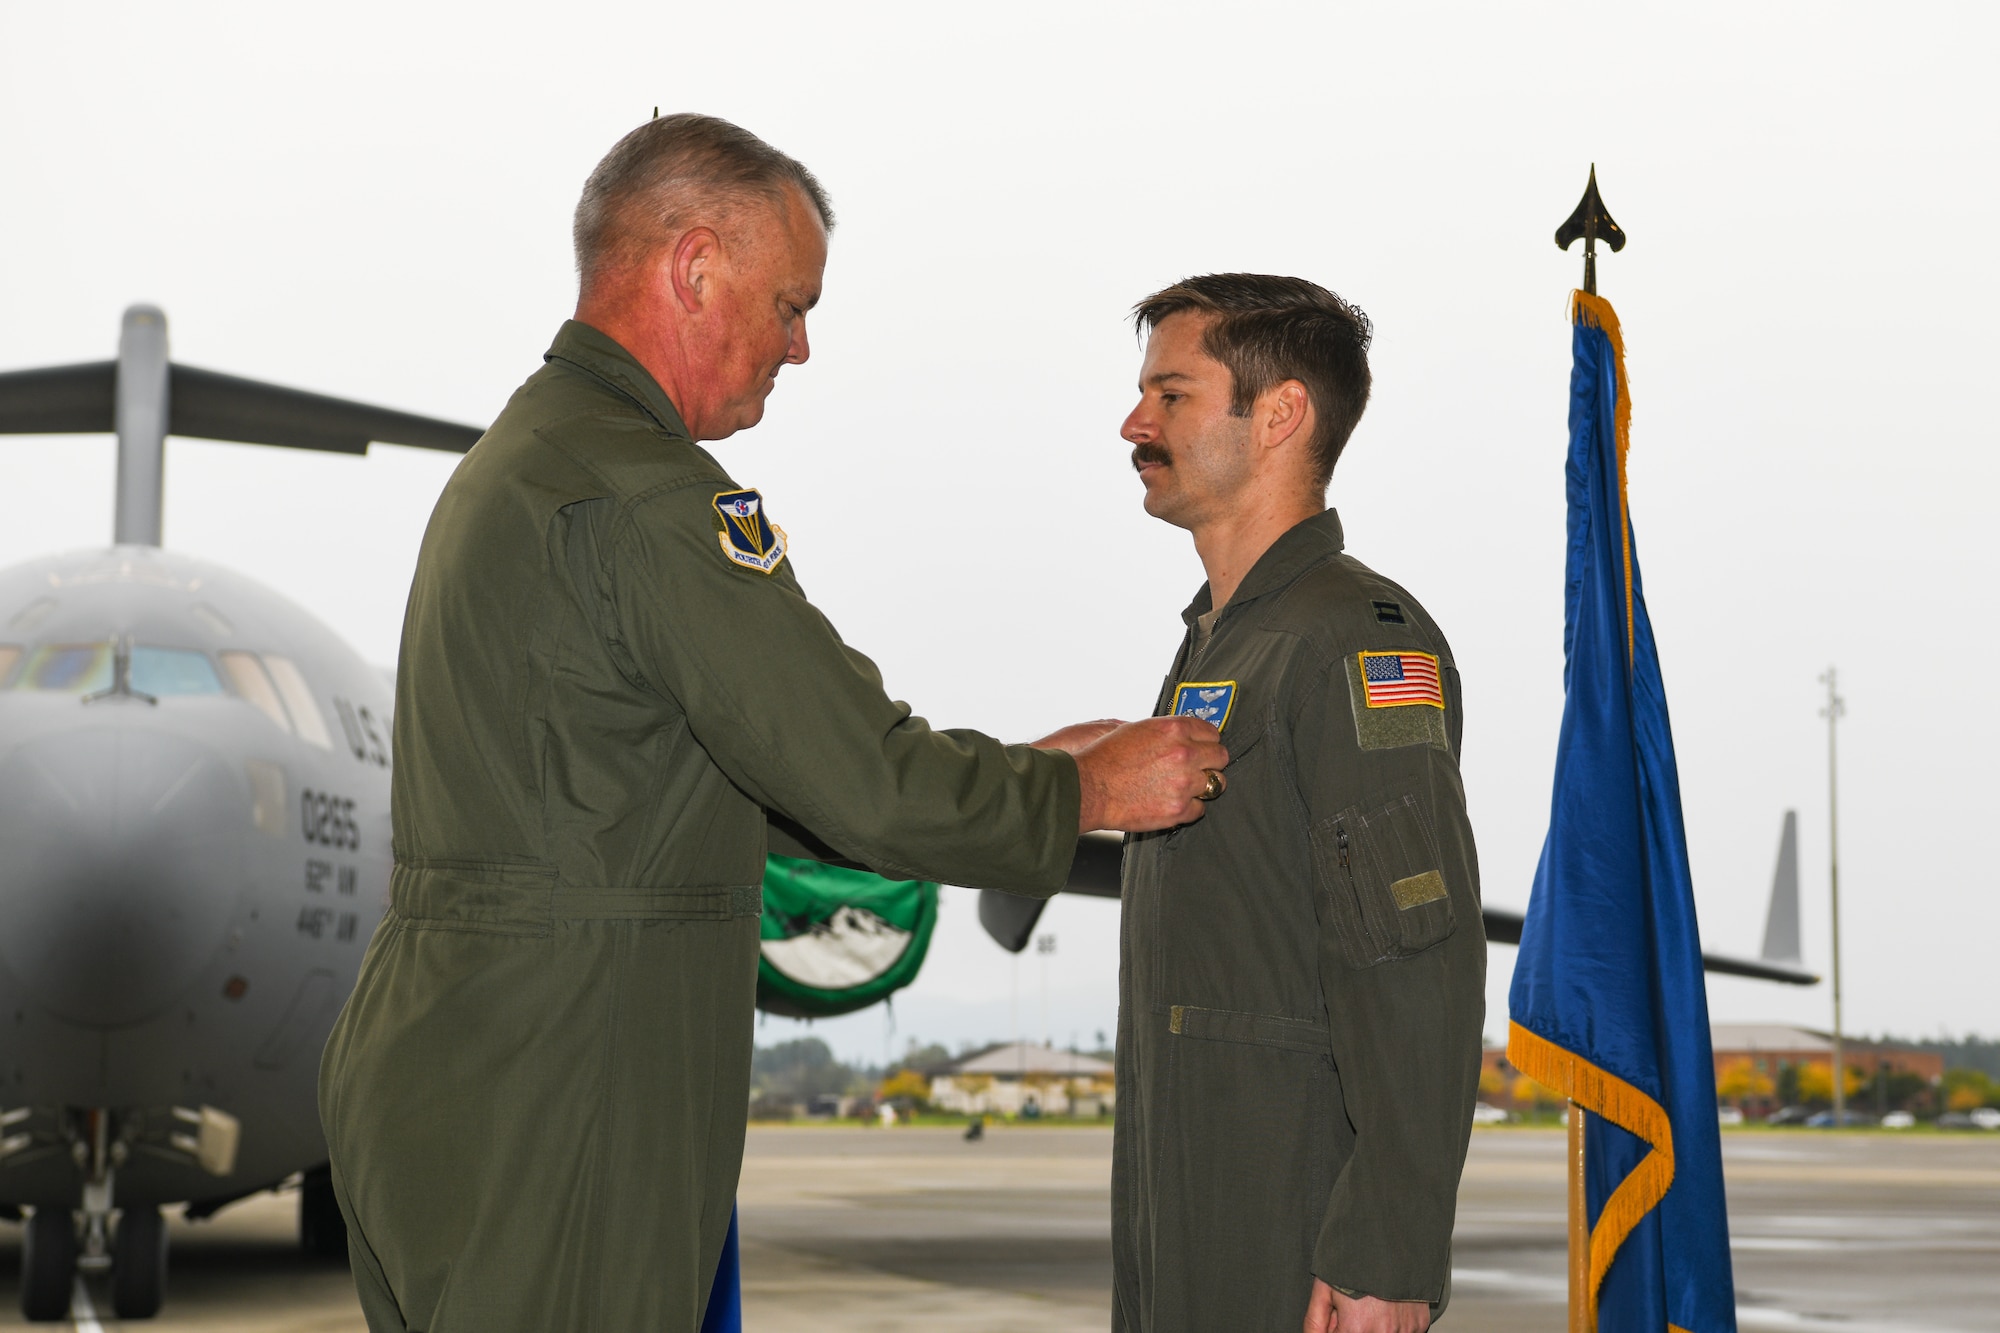 A medal pinning during a ceremony